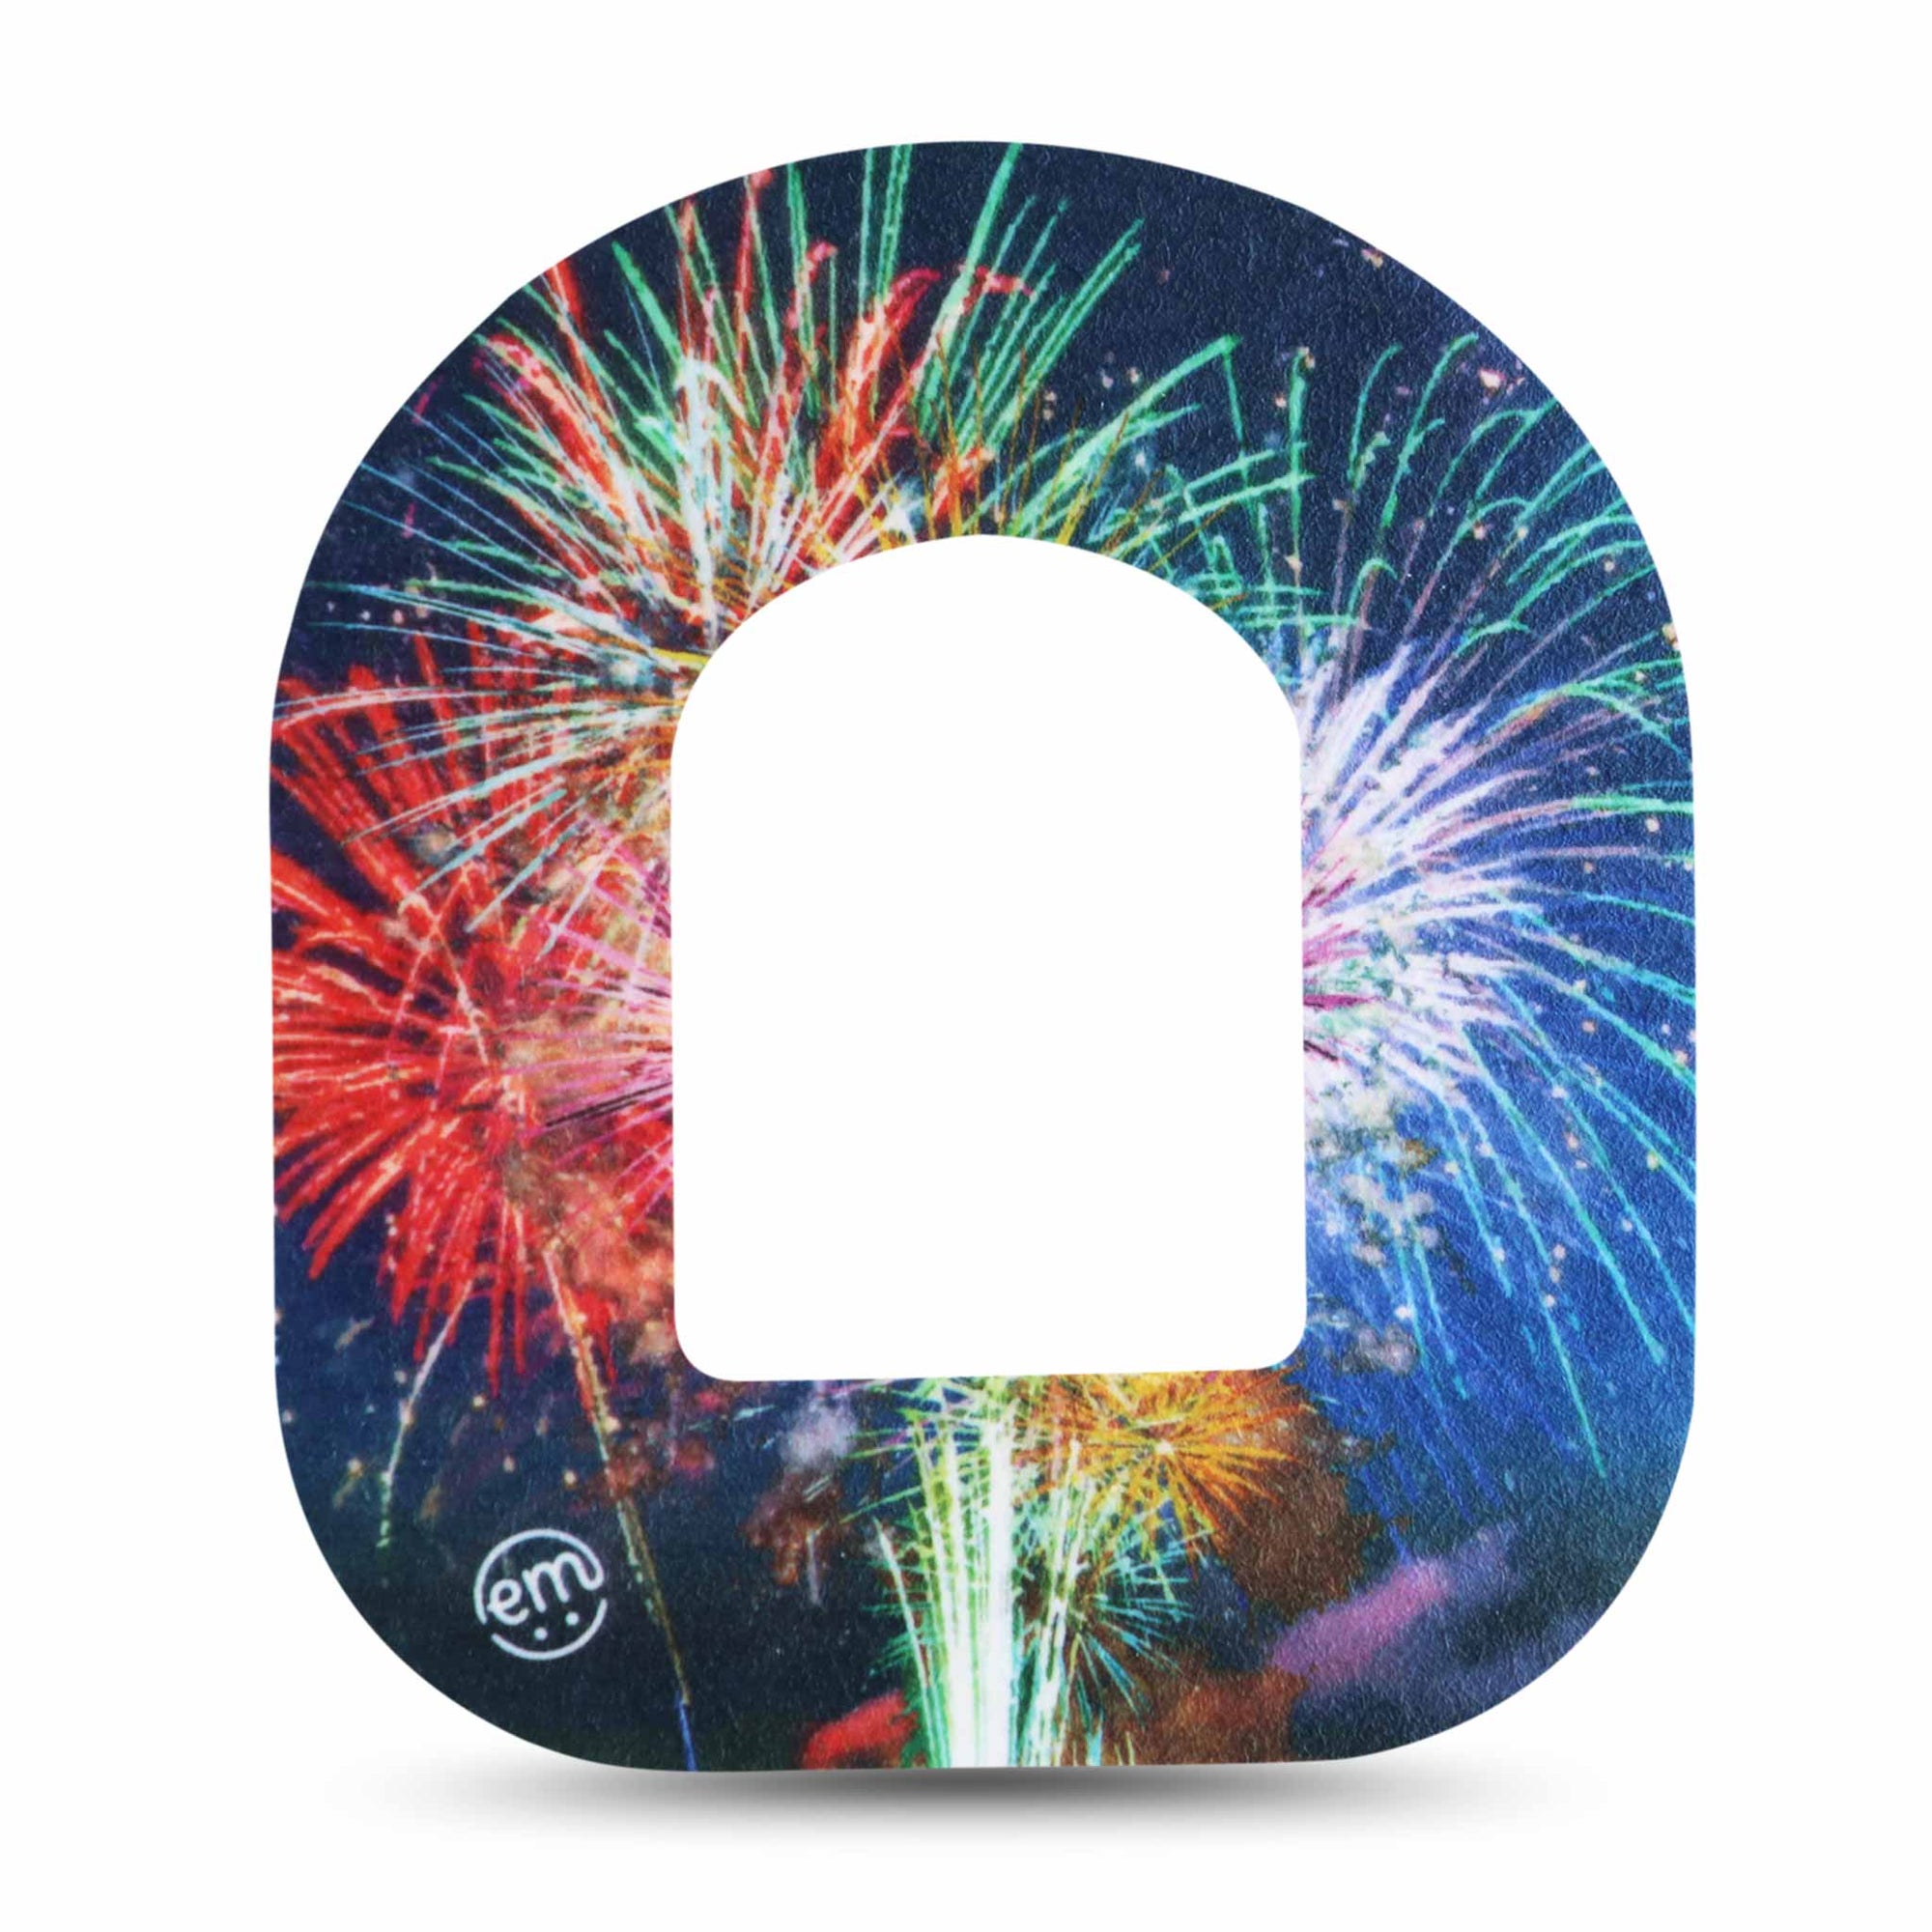 ExpressionMed Fireworks Pod Cover